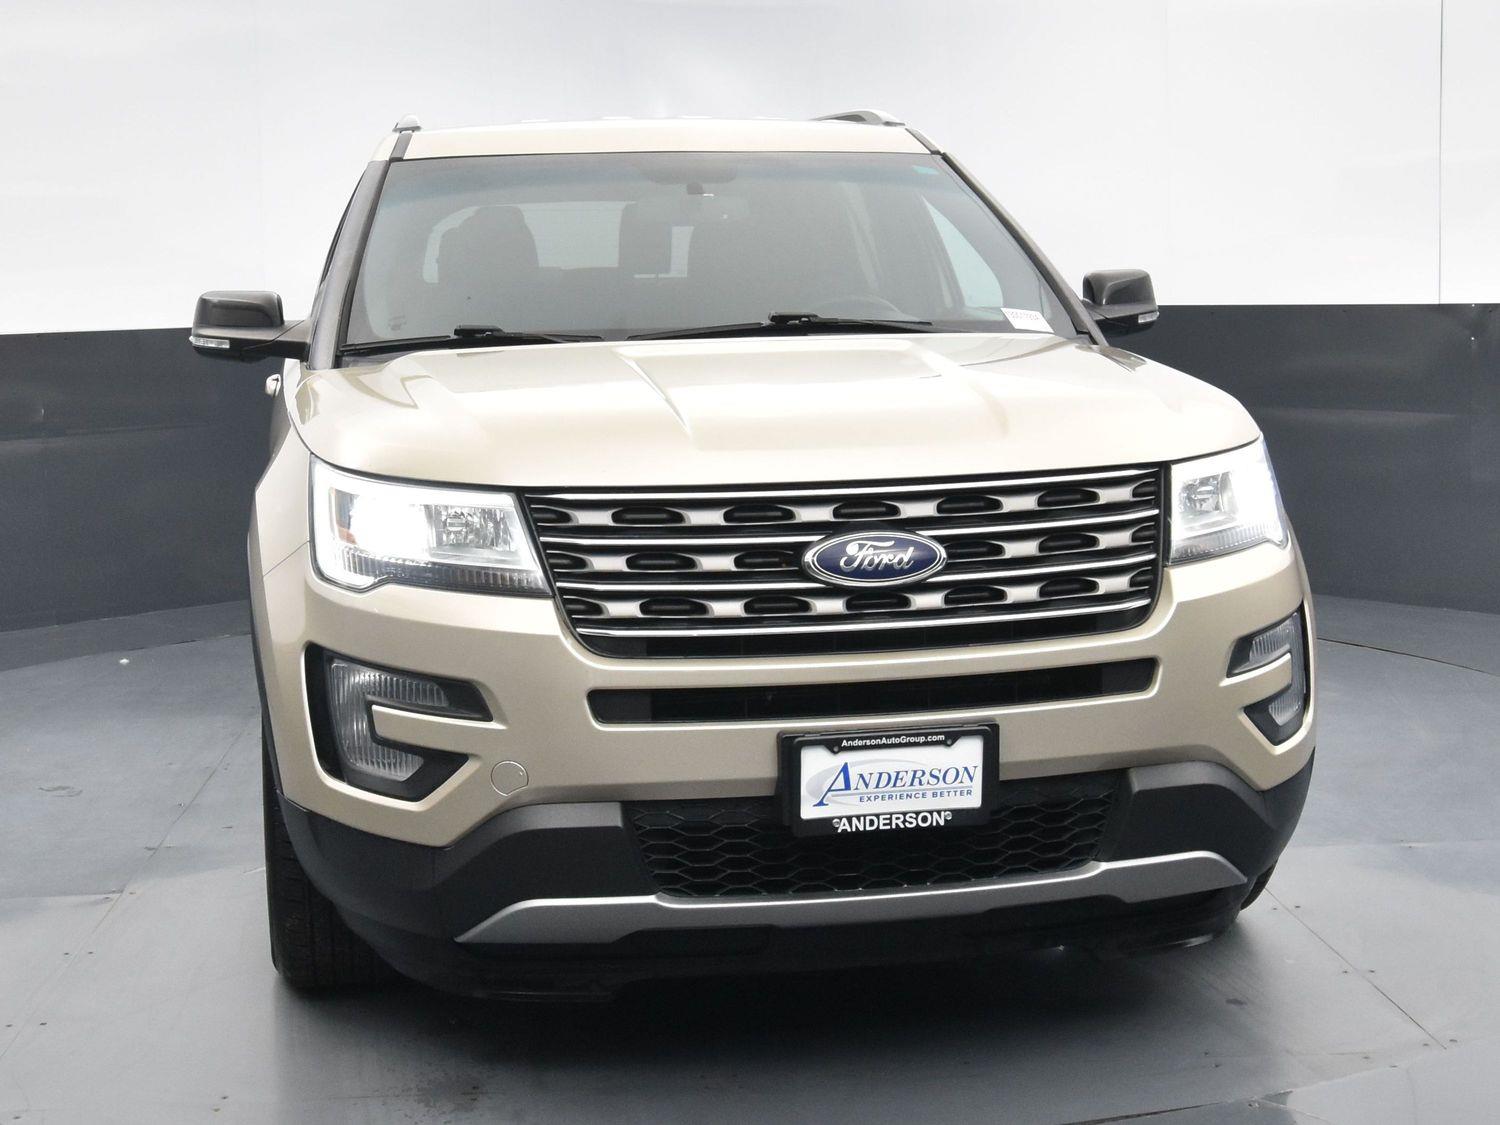 Used 2017 Ford Explorer XLT SUV for sale in Grand Island NE